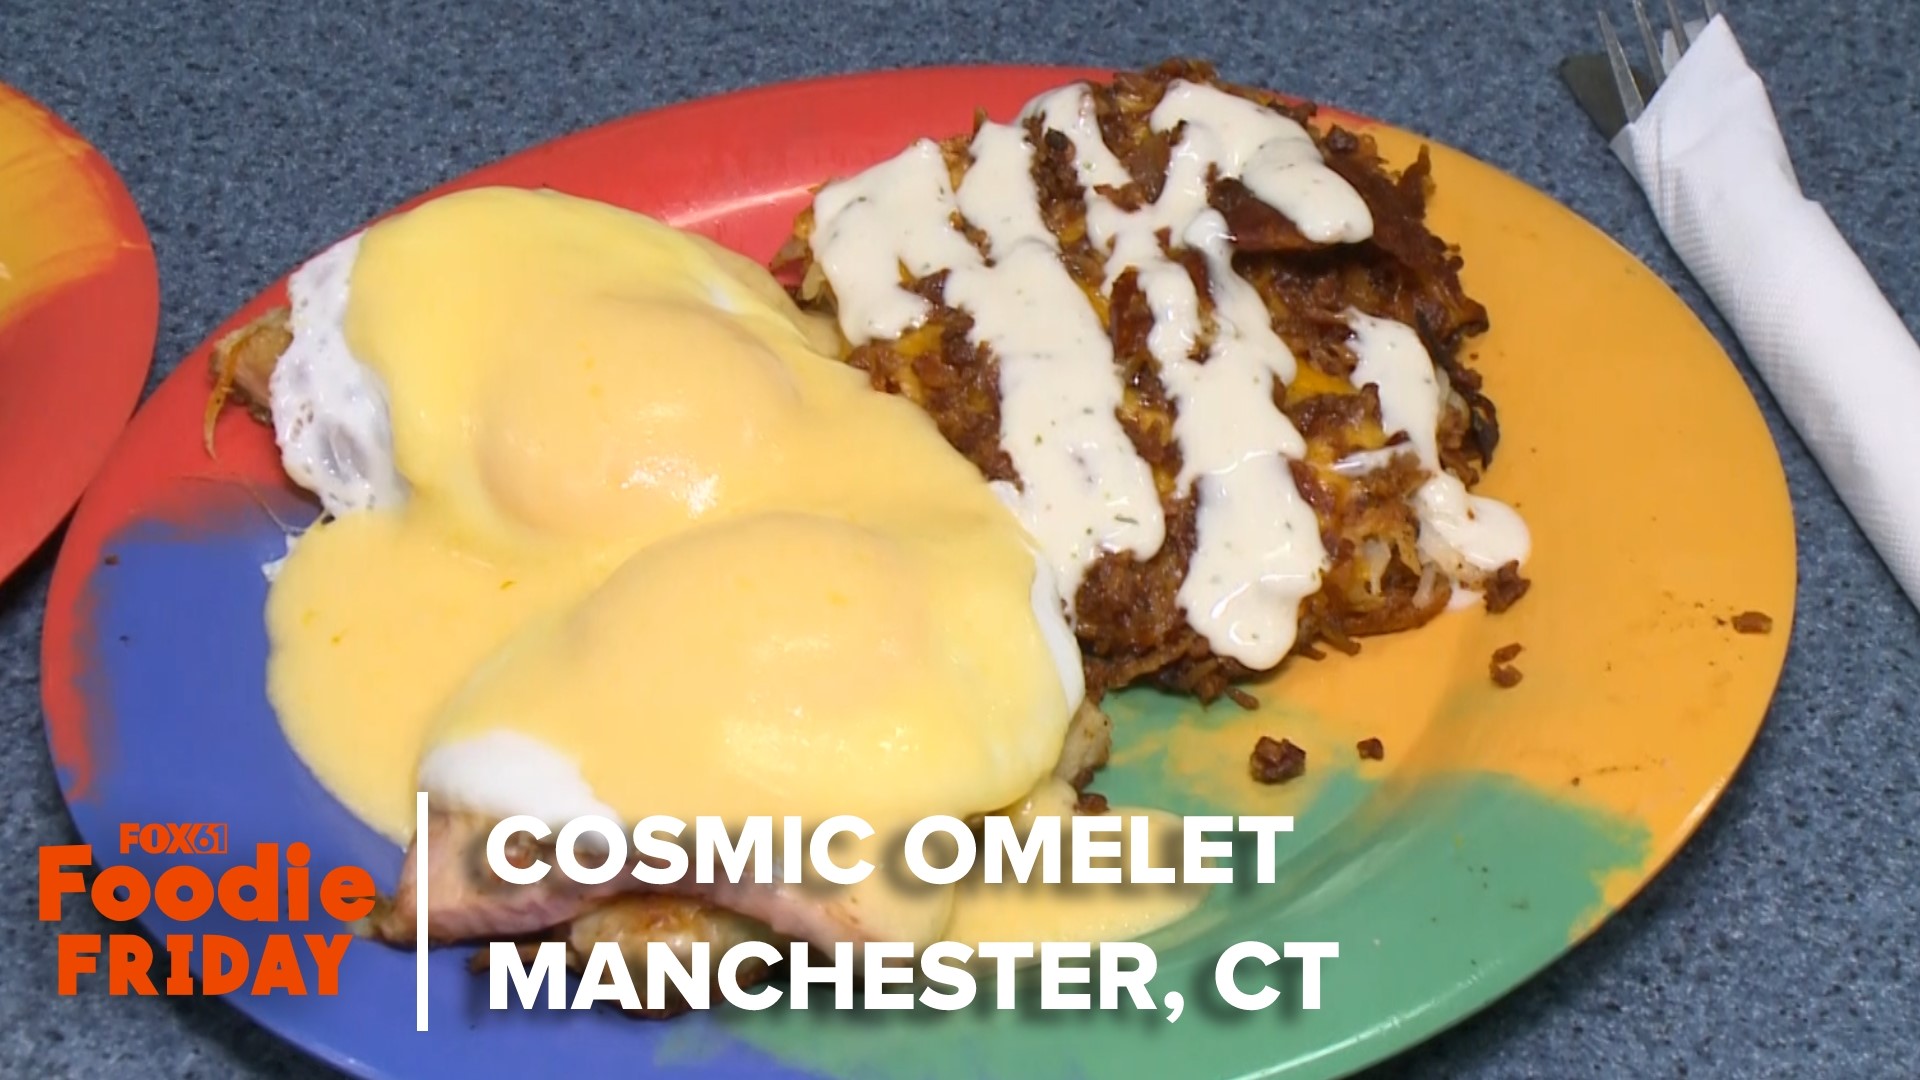 Symphonie Privett visits Cosmic Omelet in Manchester, where the breakfast meals are out of this world.